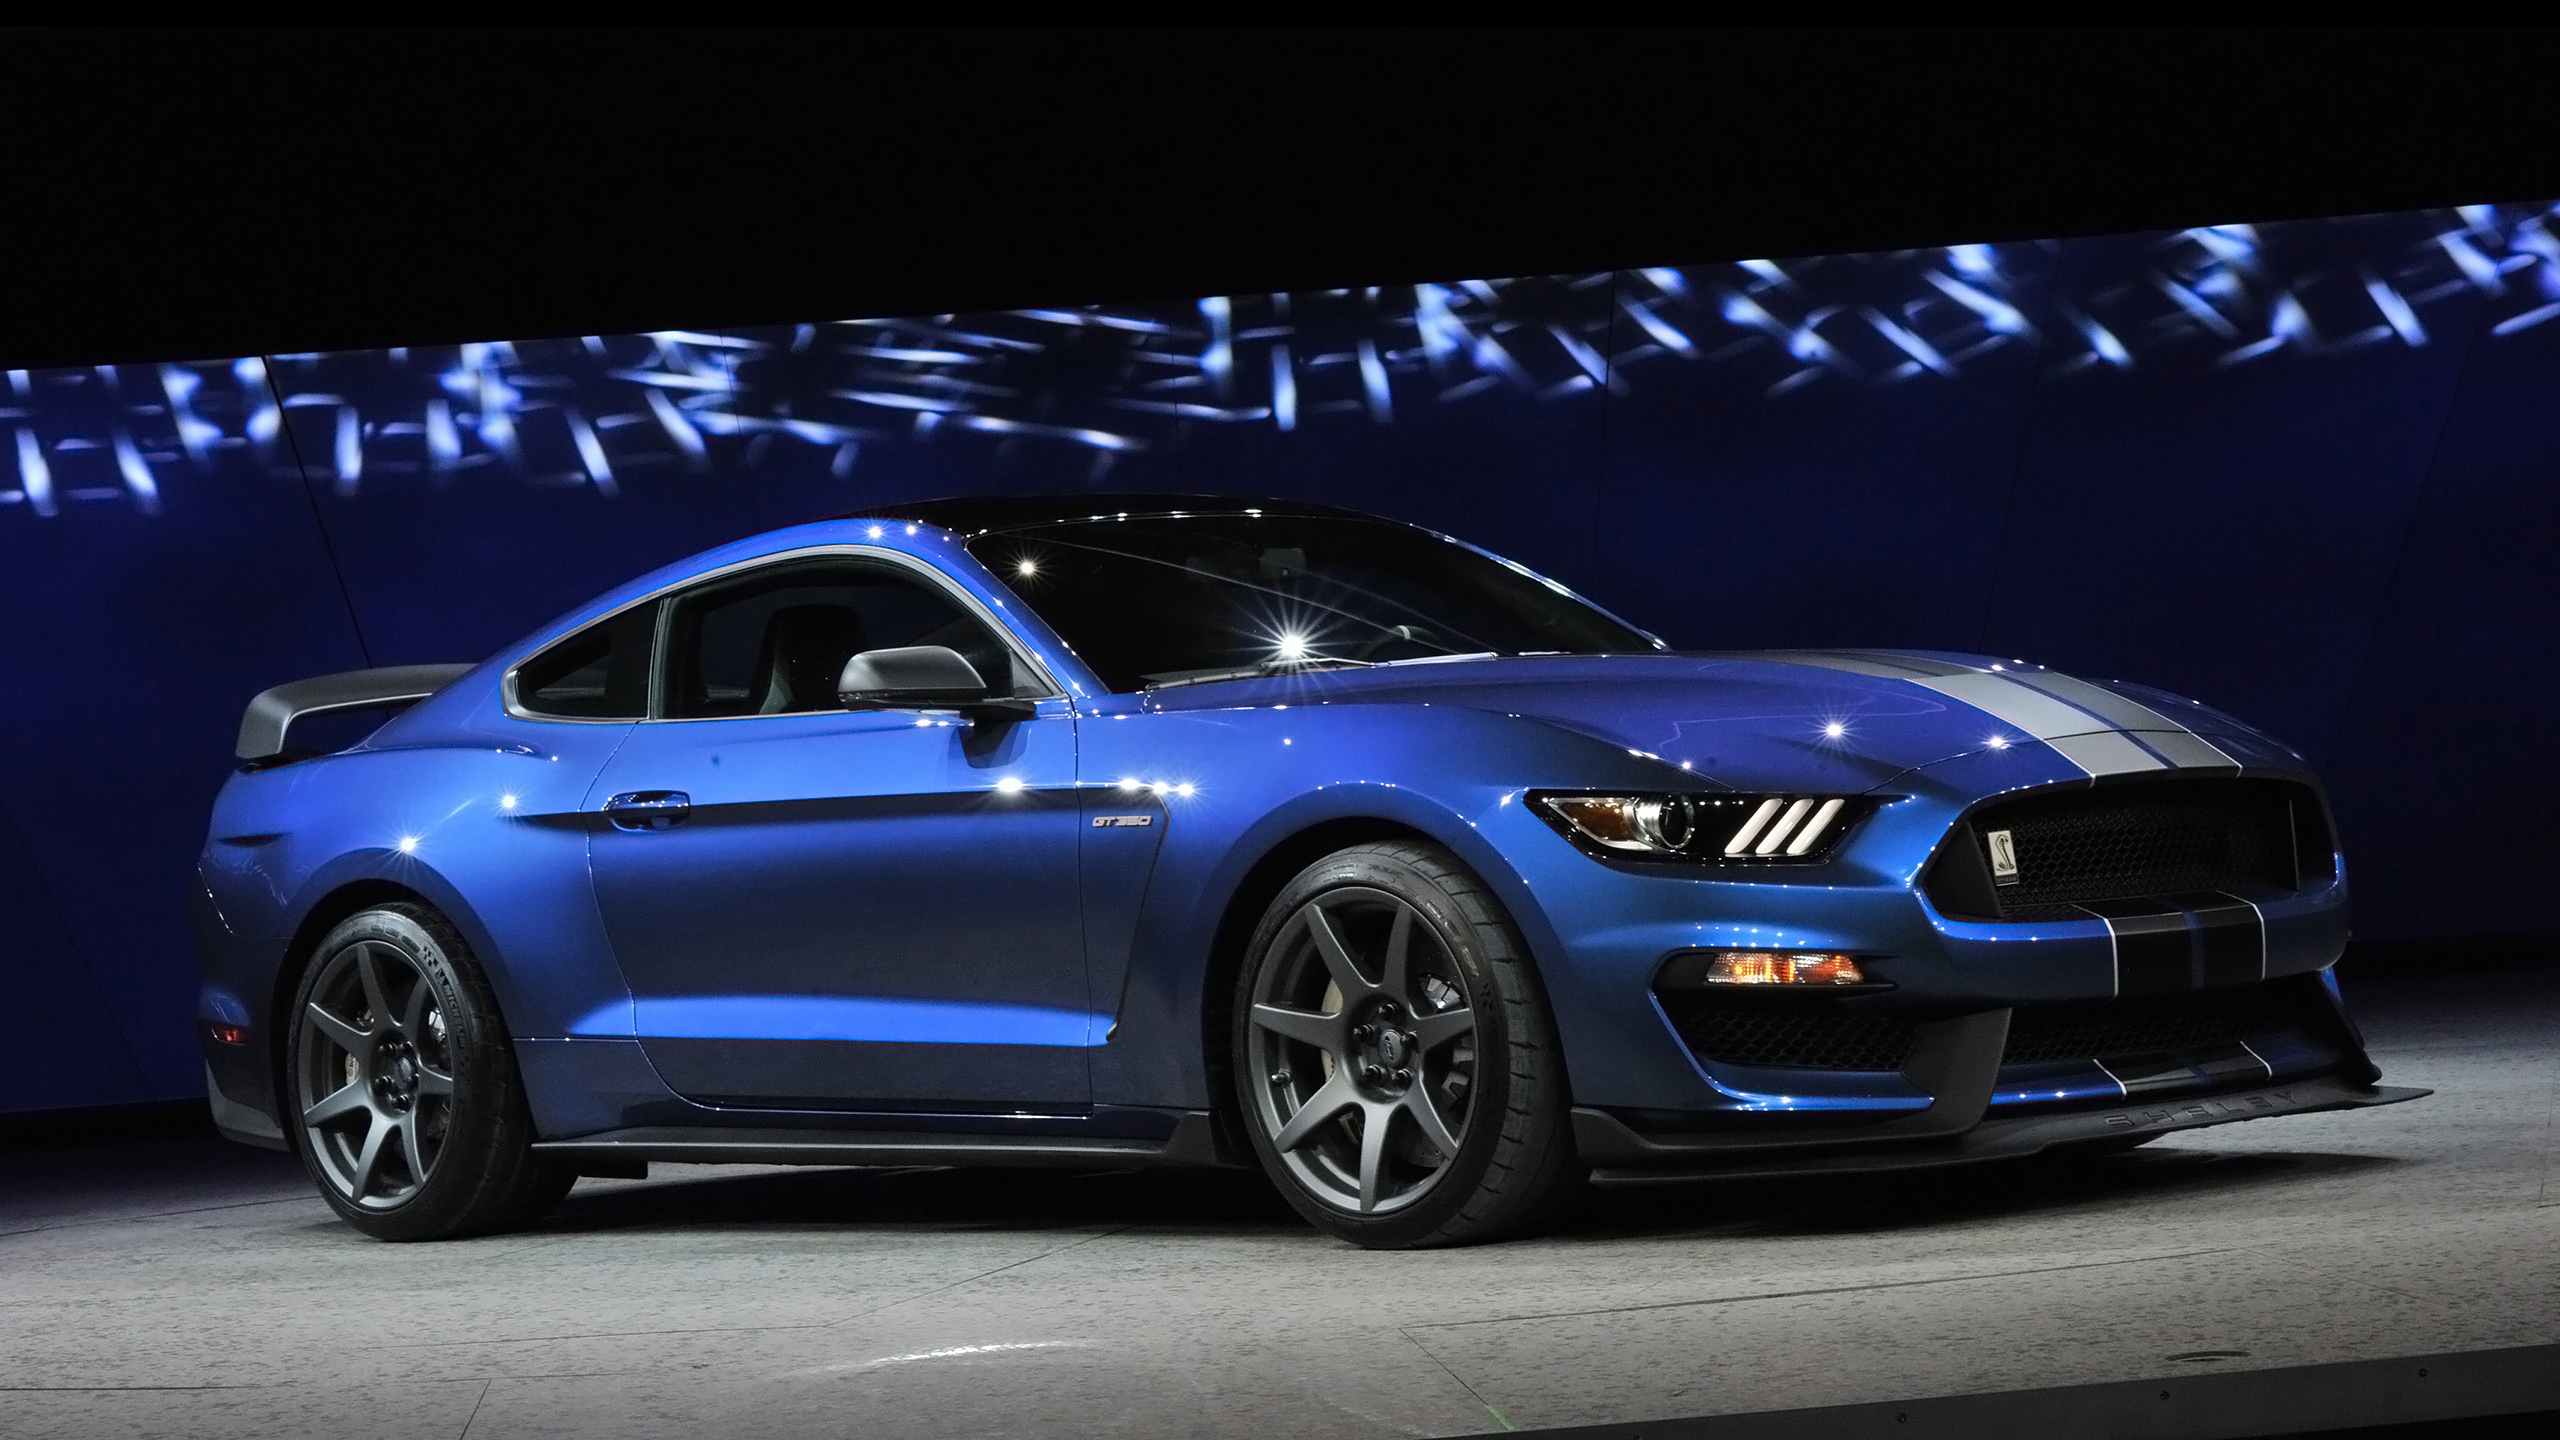 Ford Shelby Gt350r Mustang Wallpaper